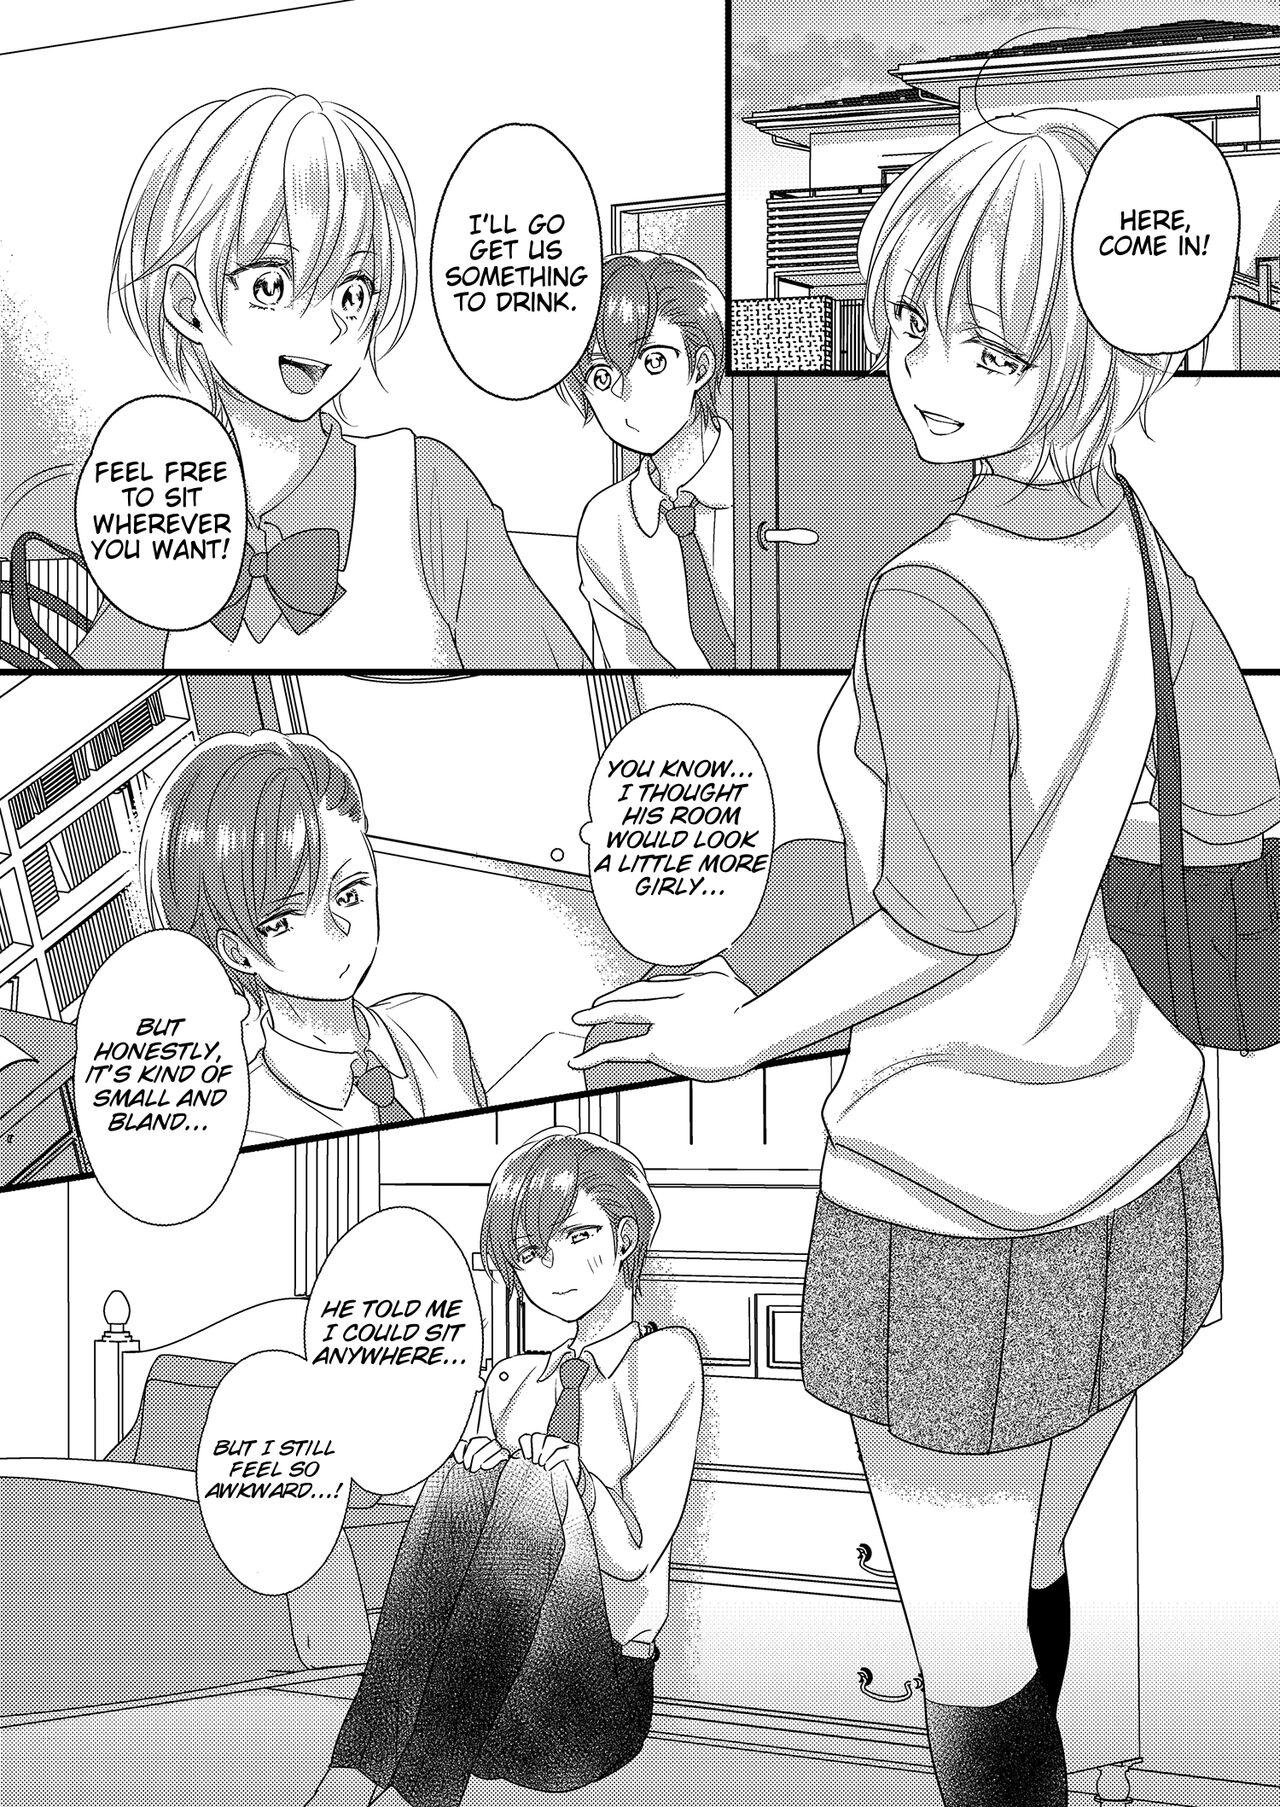 Buttplug Haru and Sana ～Love Connected Through Cosplay～ - Original Cum Swallow - Page 9